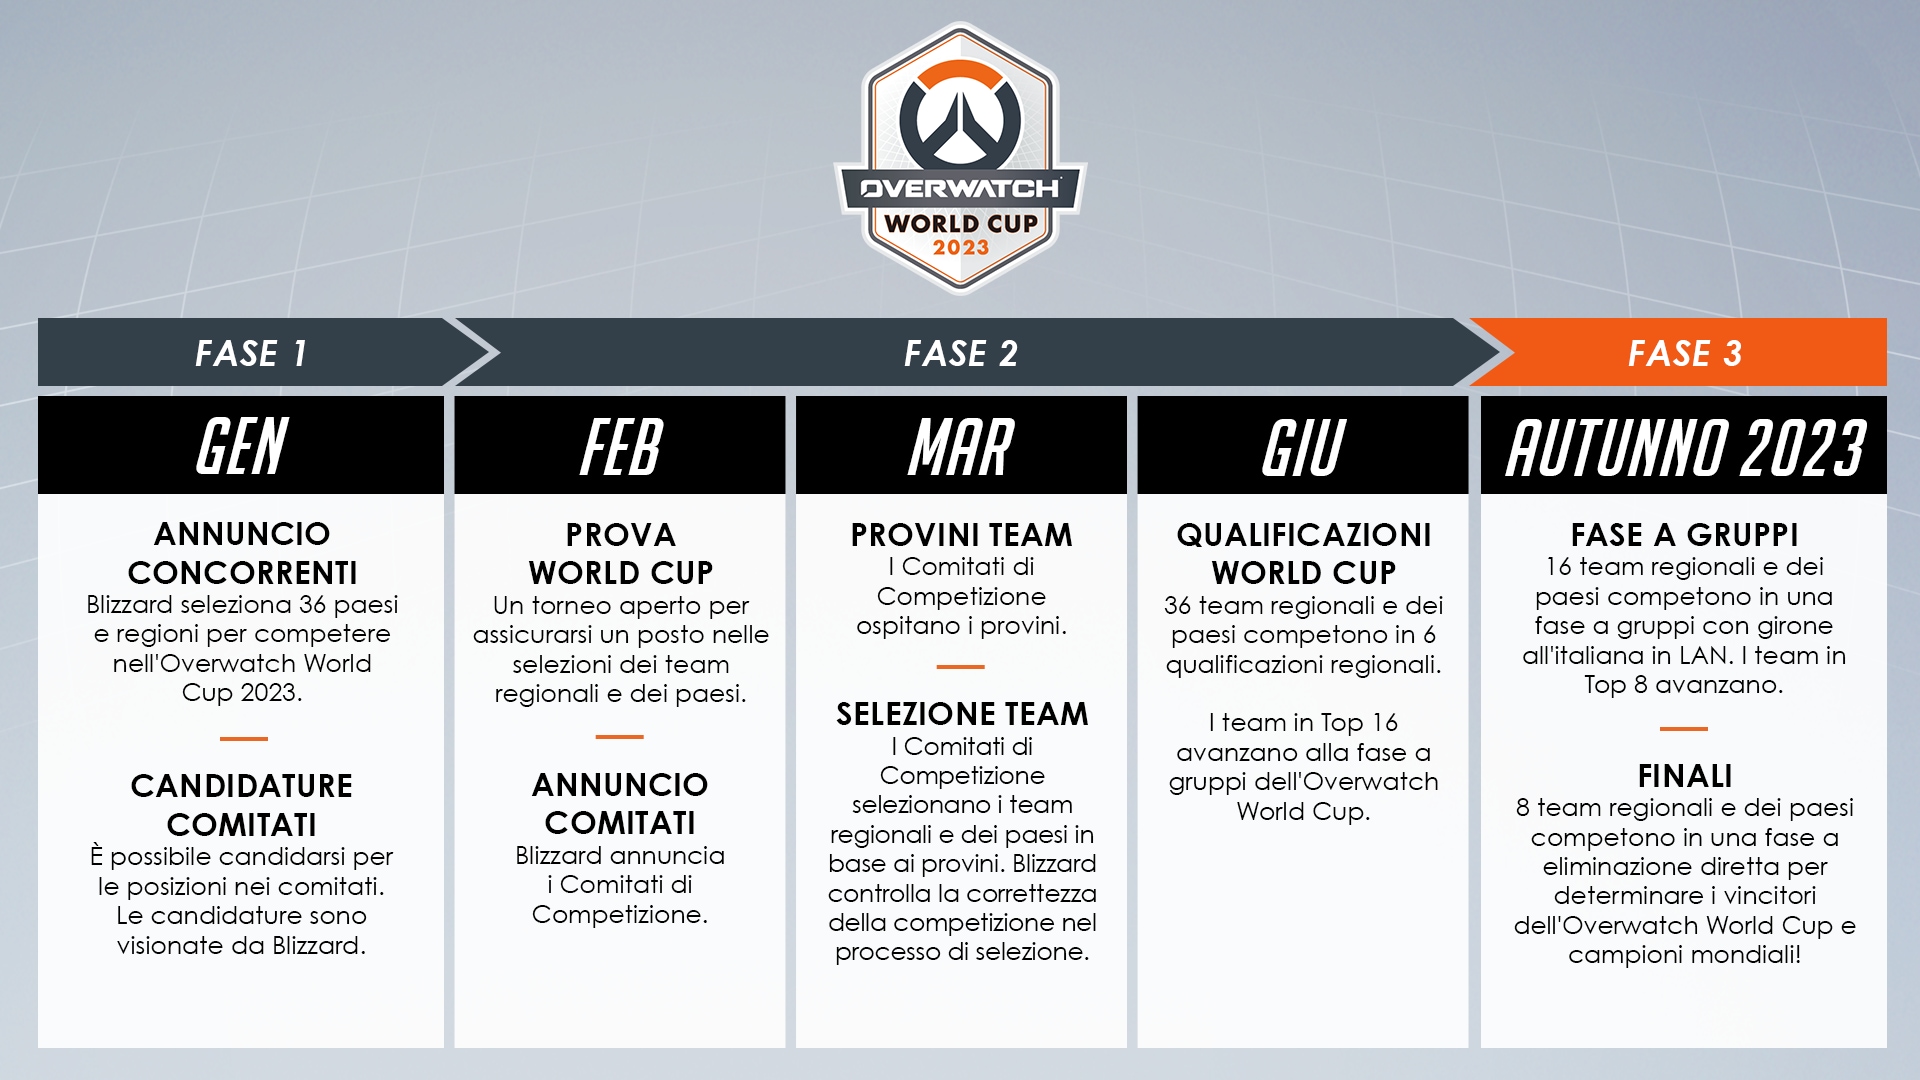 OWWC_2022_WC-Timeline_itIT_BA01-1.png